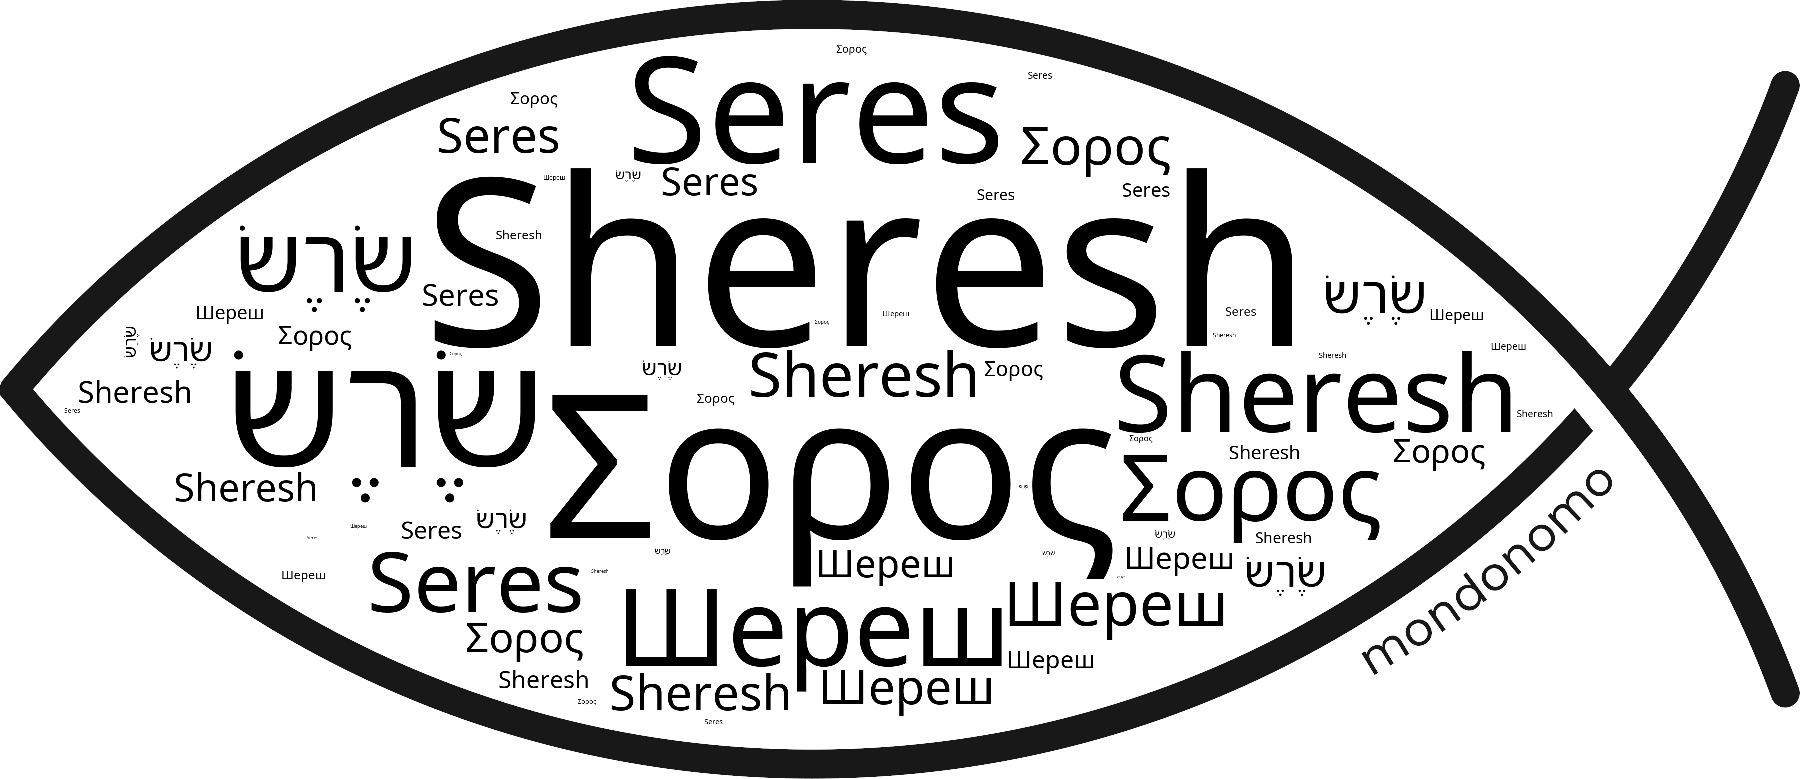 Name Sheresh in the world's Bibles